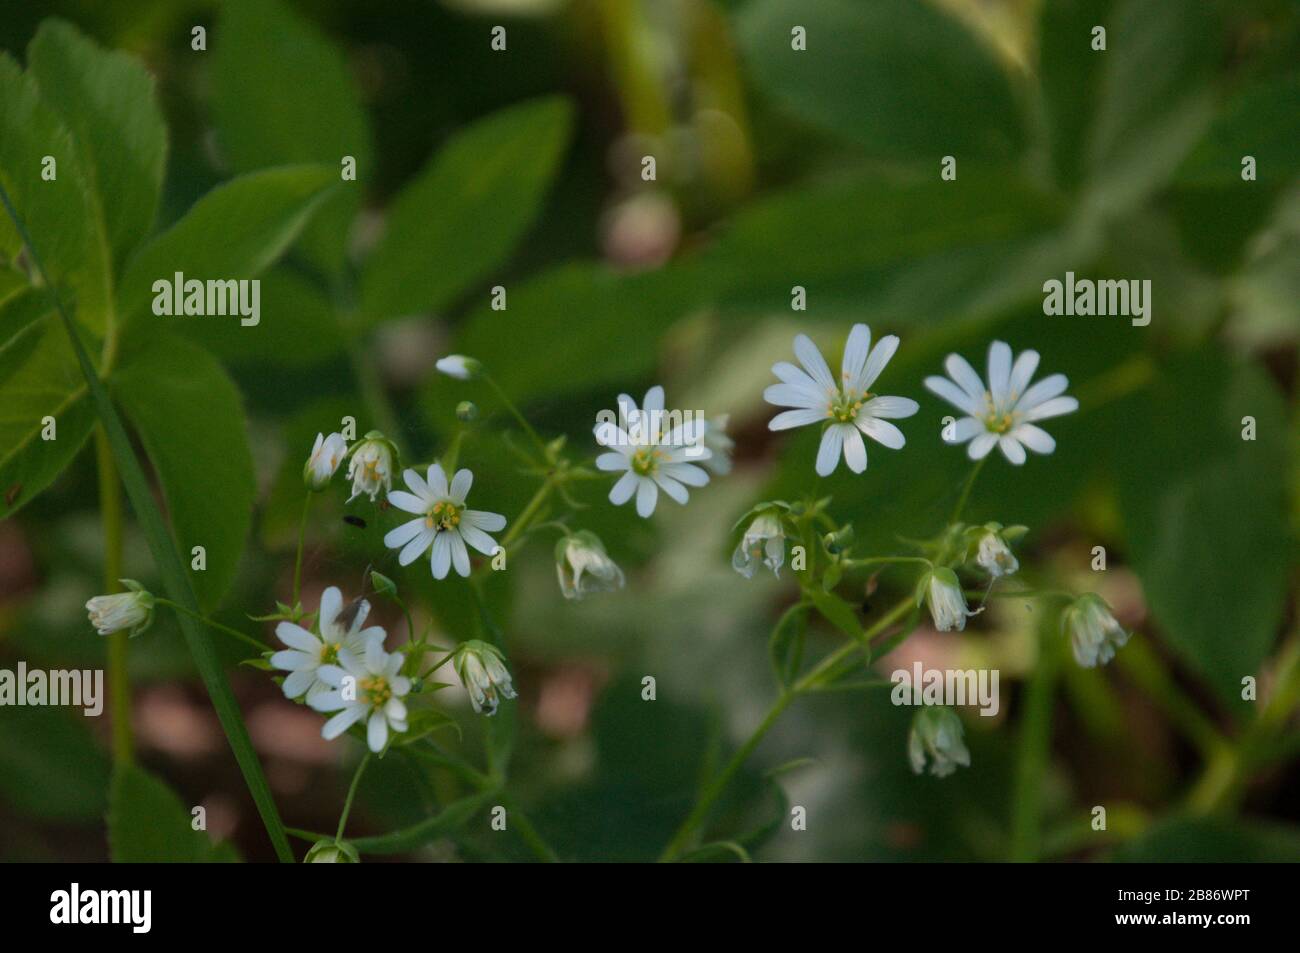 A charming spring flowers of starwort close-up photo with green foliage in the background. Stock Photo